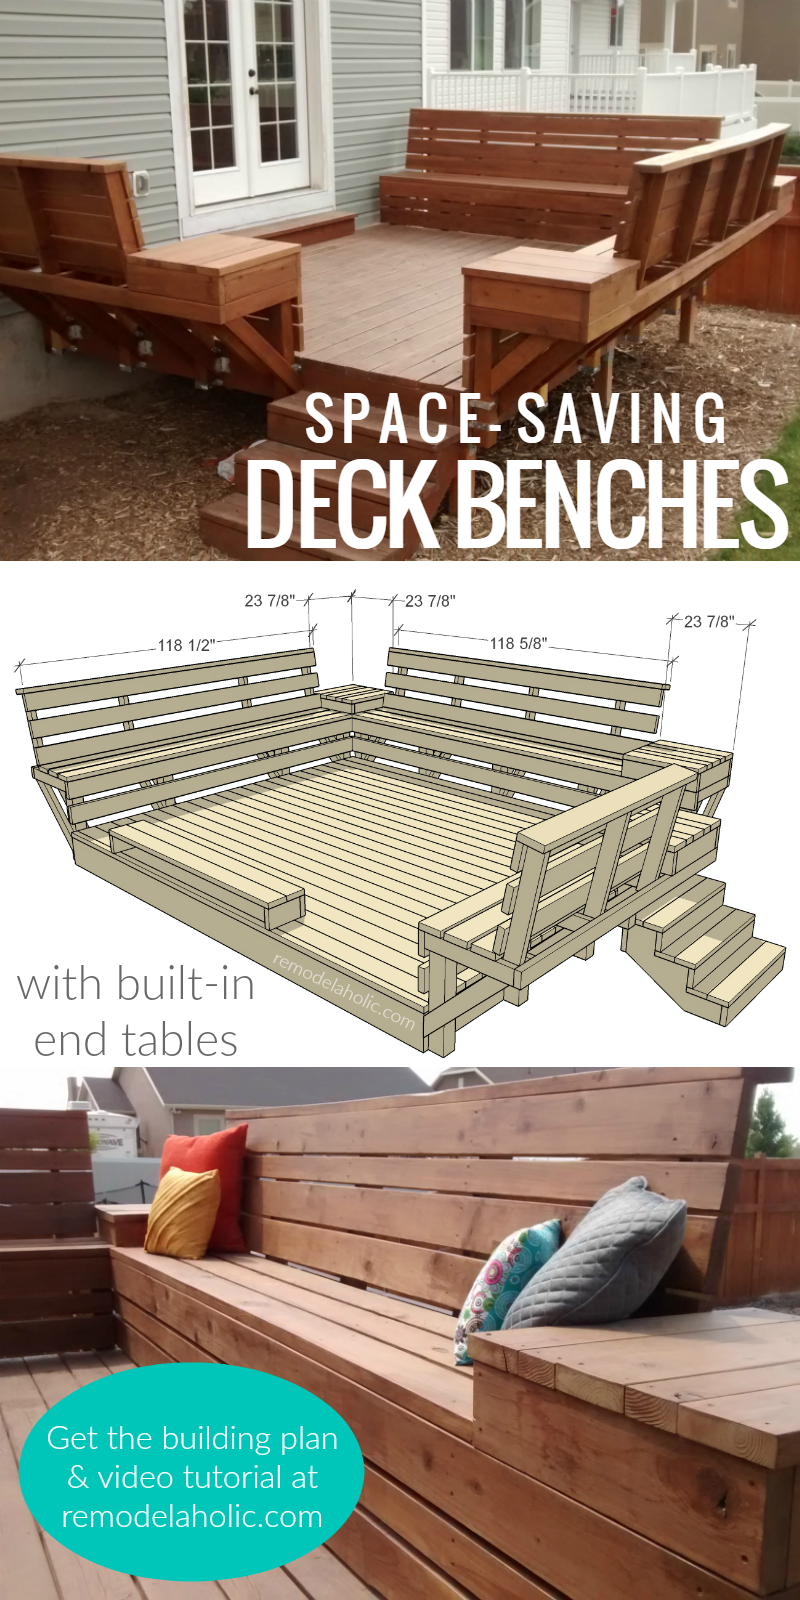 Remodelaholic | How to Build Space-Saving Deck Benches for a Small Deck -   14 garden design Wood decks ideas